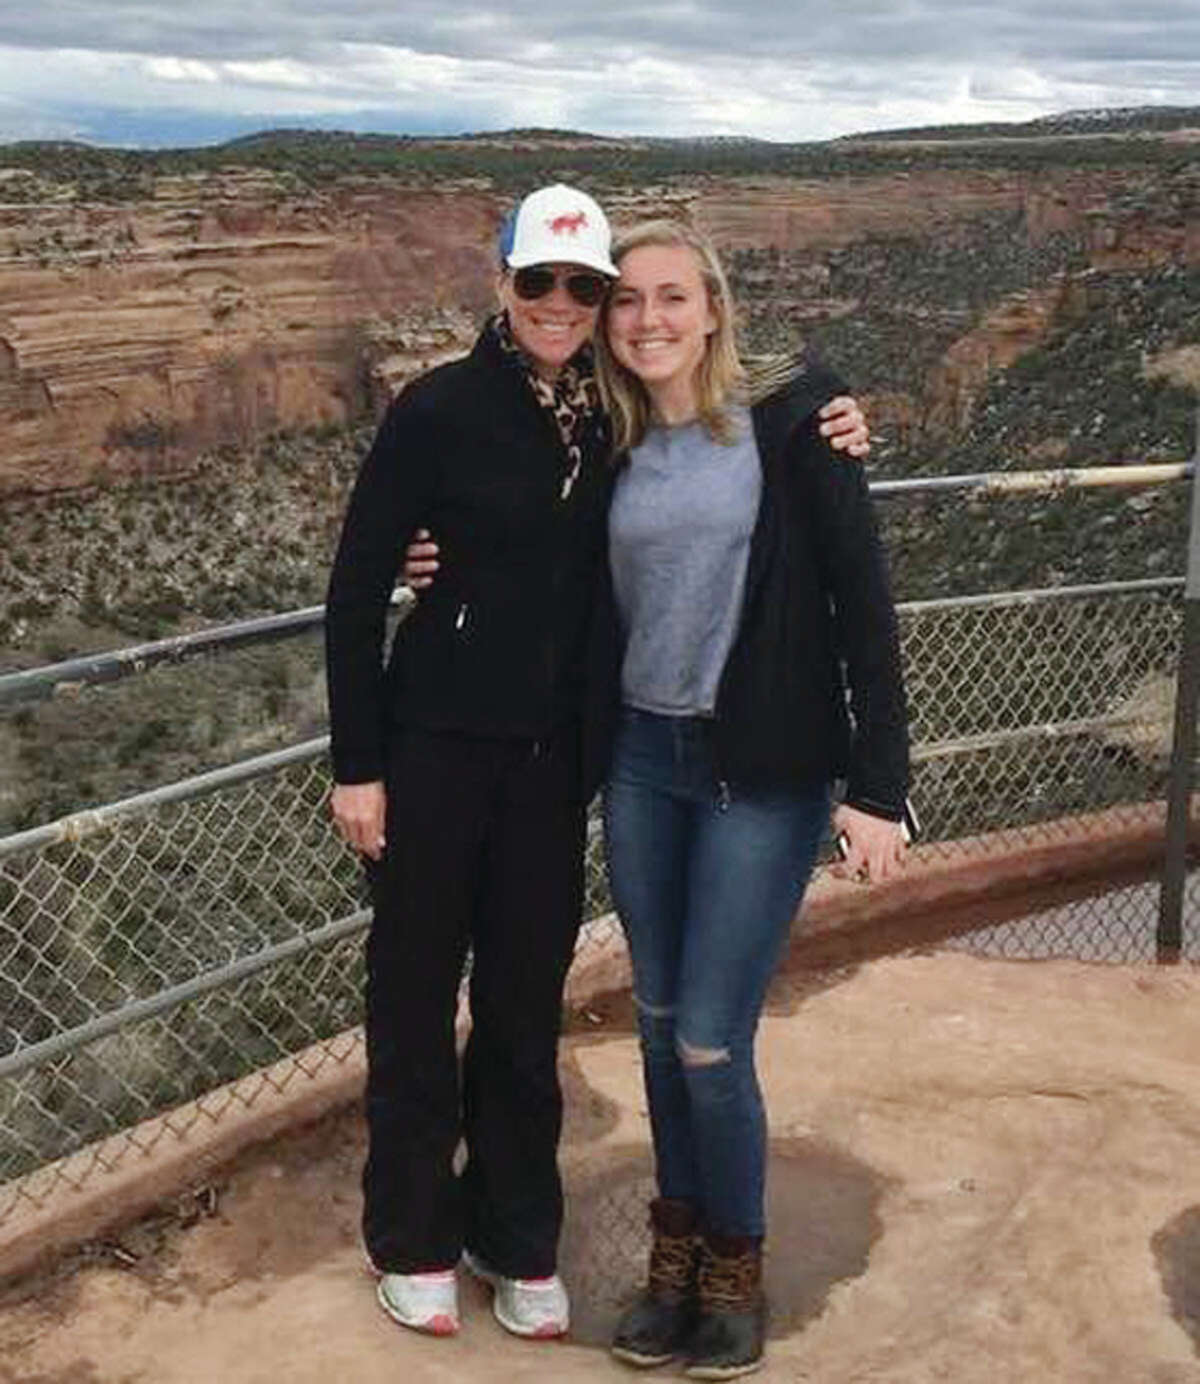 Meme Evans and her daughter, Annie Evans, pose for a photo in Grand Junction, Colorado, while visiting Colorado Mesa University. They visited three separate colleges on a recent trip to Colorado.